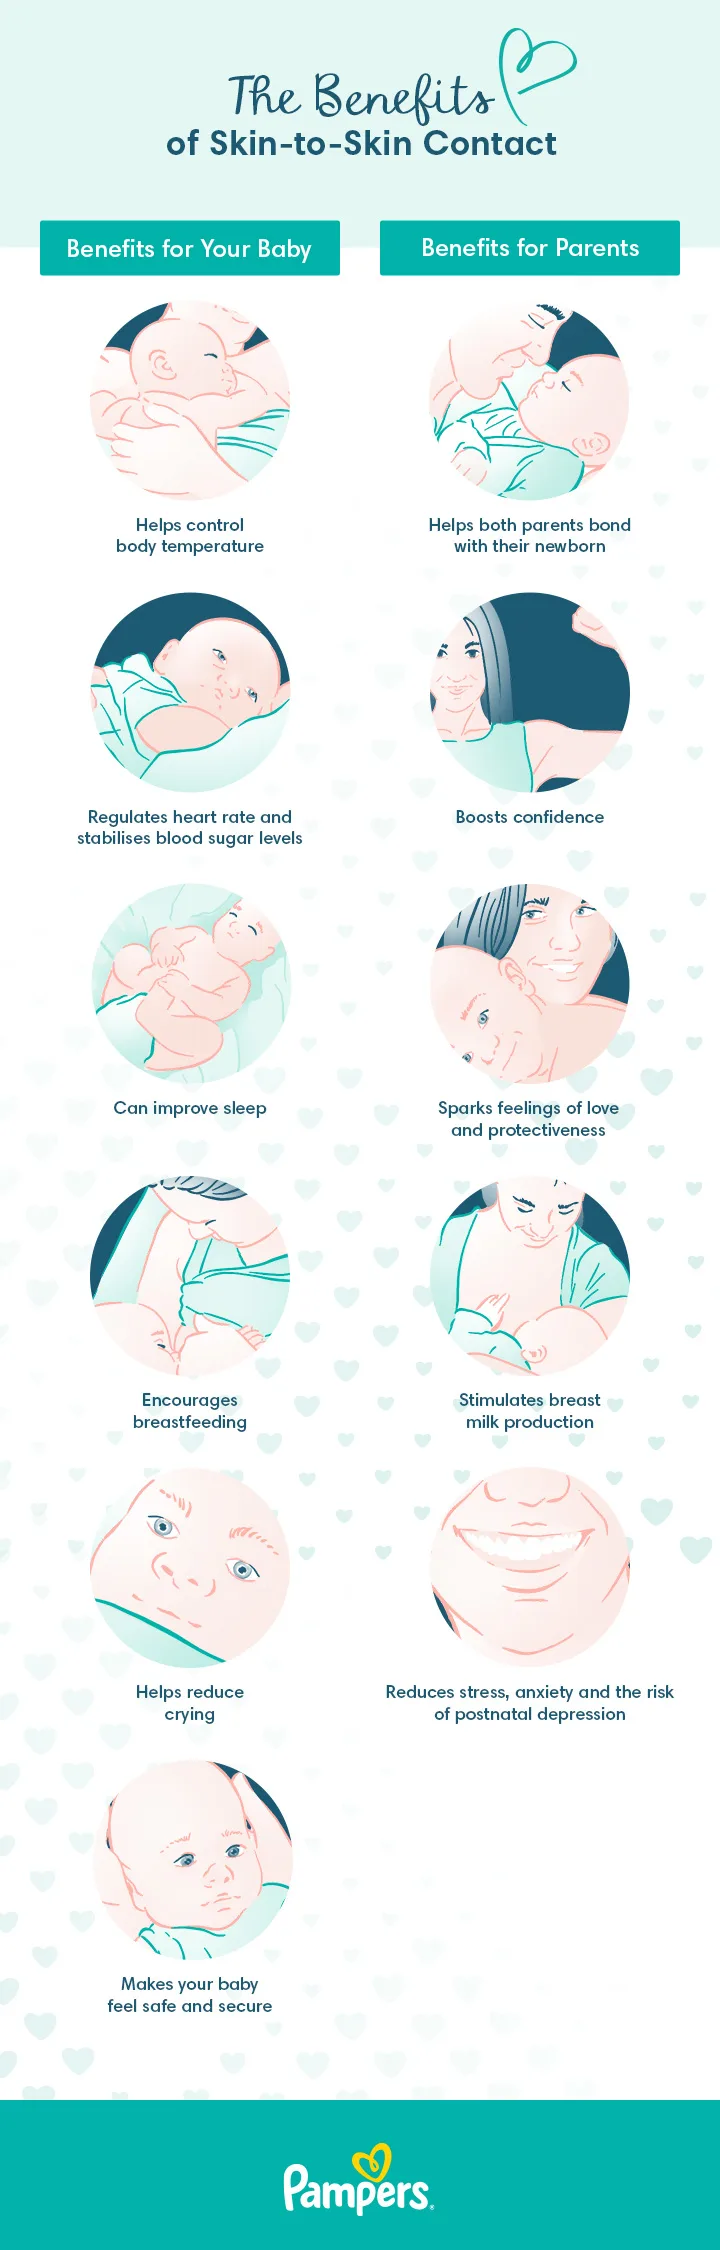 The Benefits of Skin-to-Skin Contact